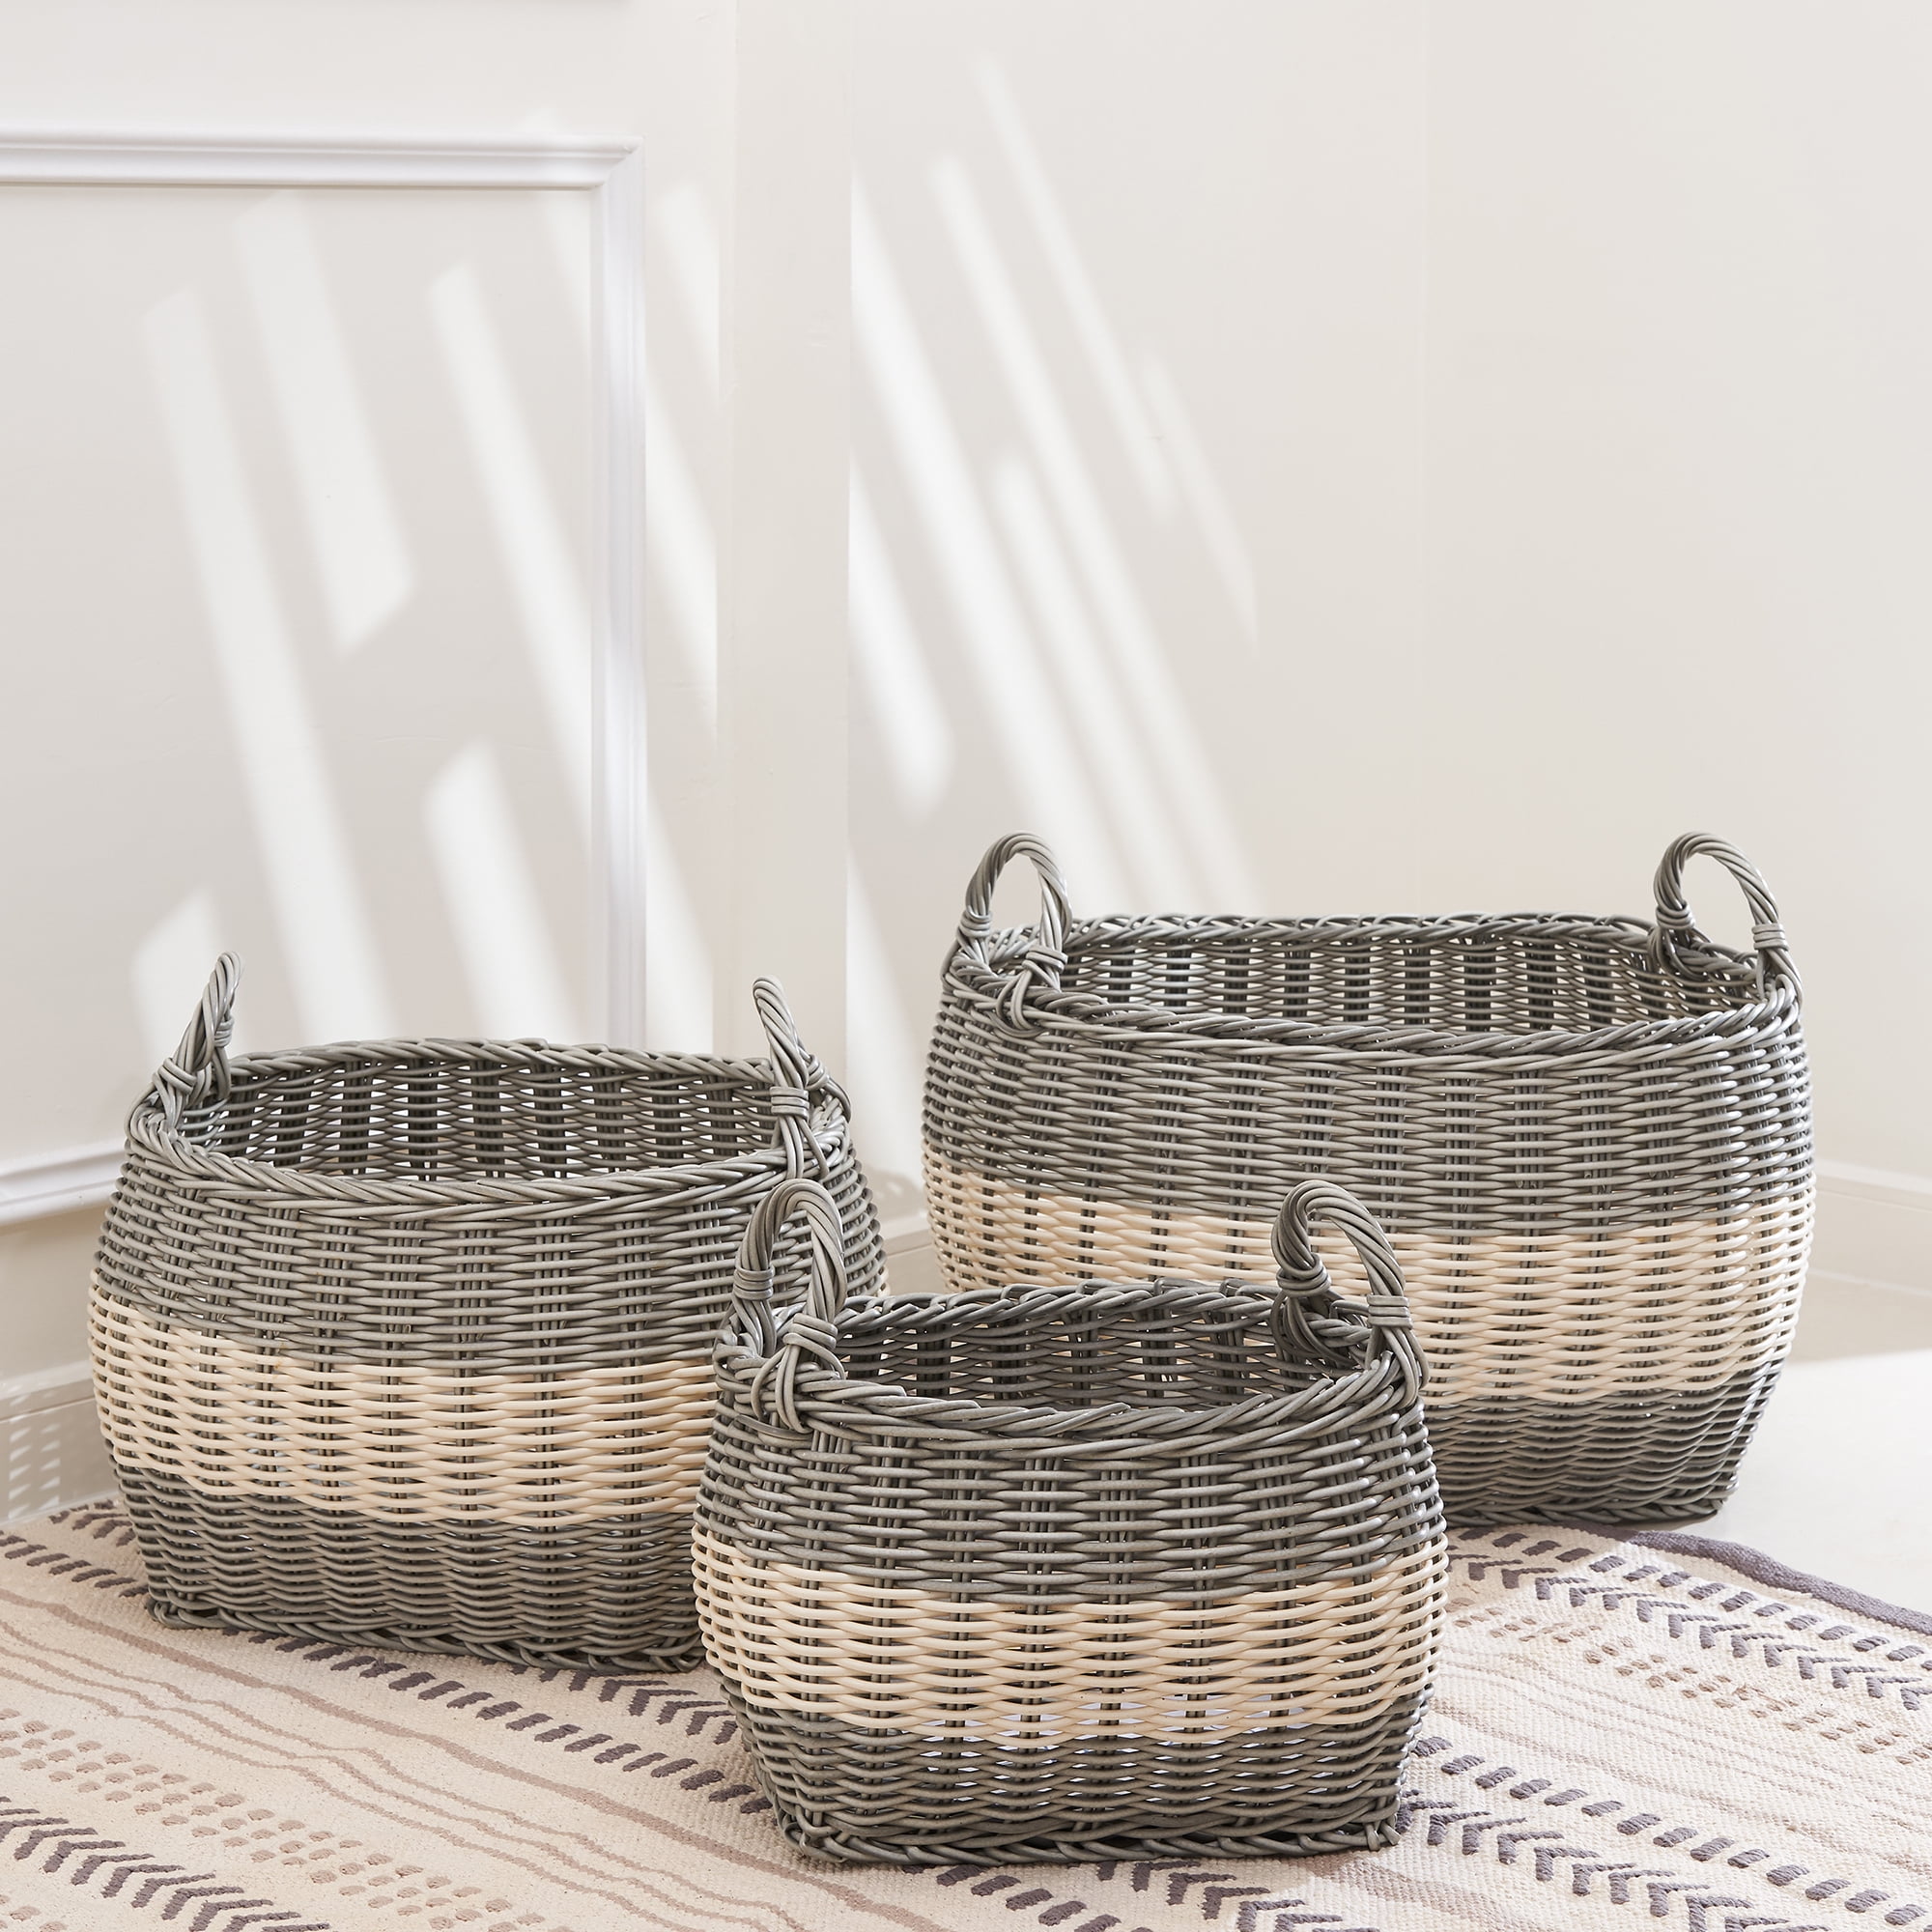 Hannah 3-piece Assorted Stackable Oval Resin Storage and Laundry Basket Set with Handles